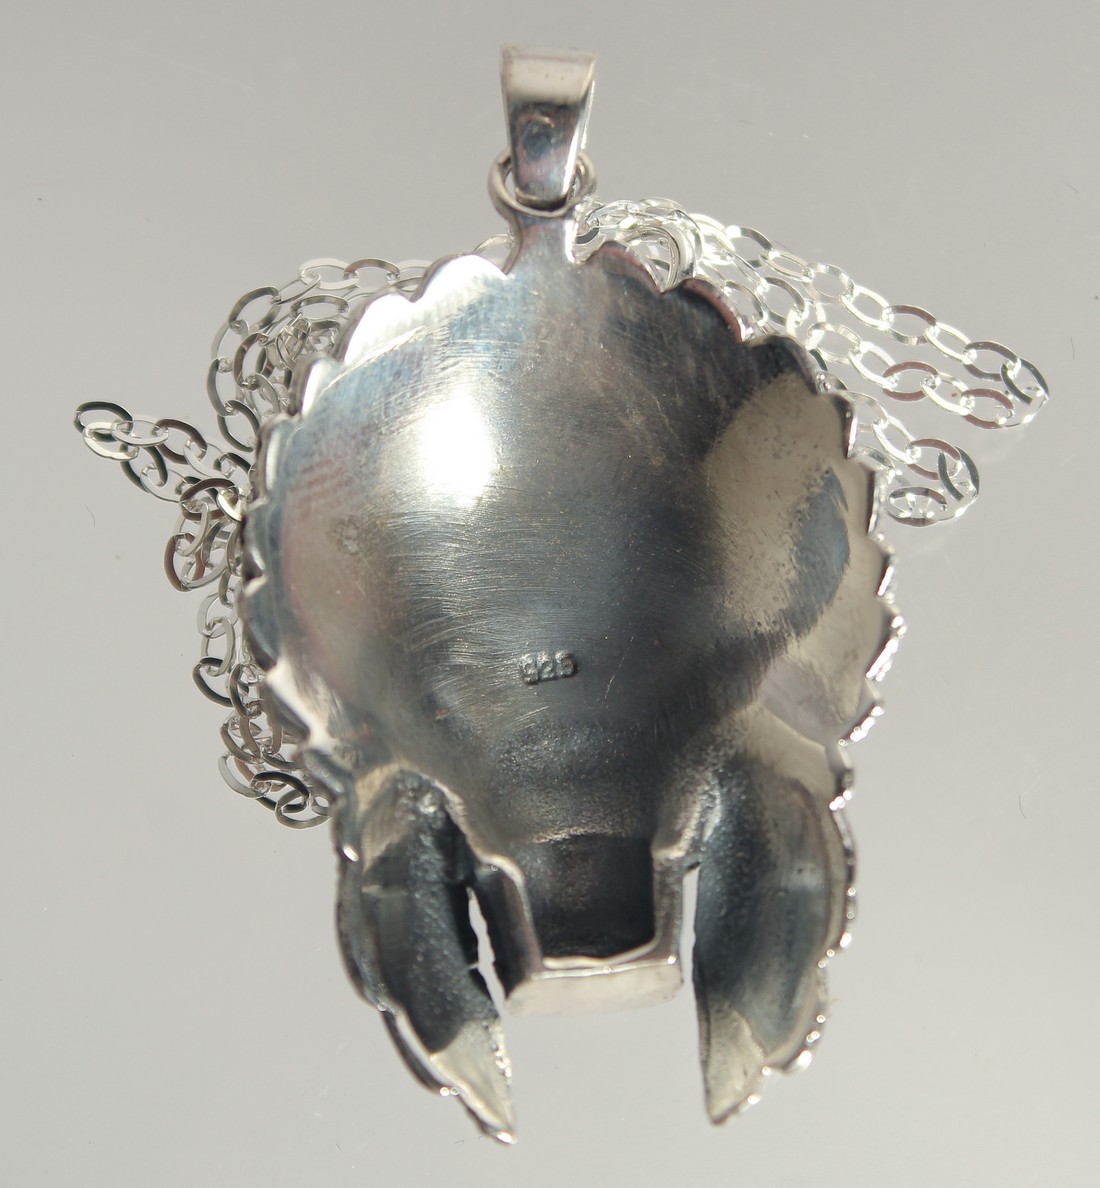 A NATIVE AMERICAN SKULL PENDANT AND CHAIN. - Image 2 of 2